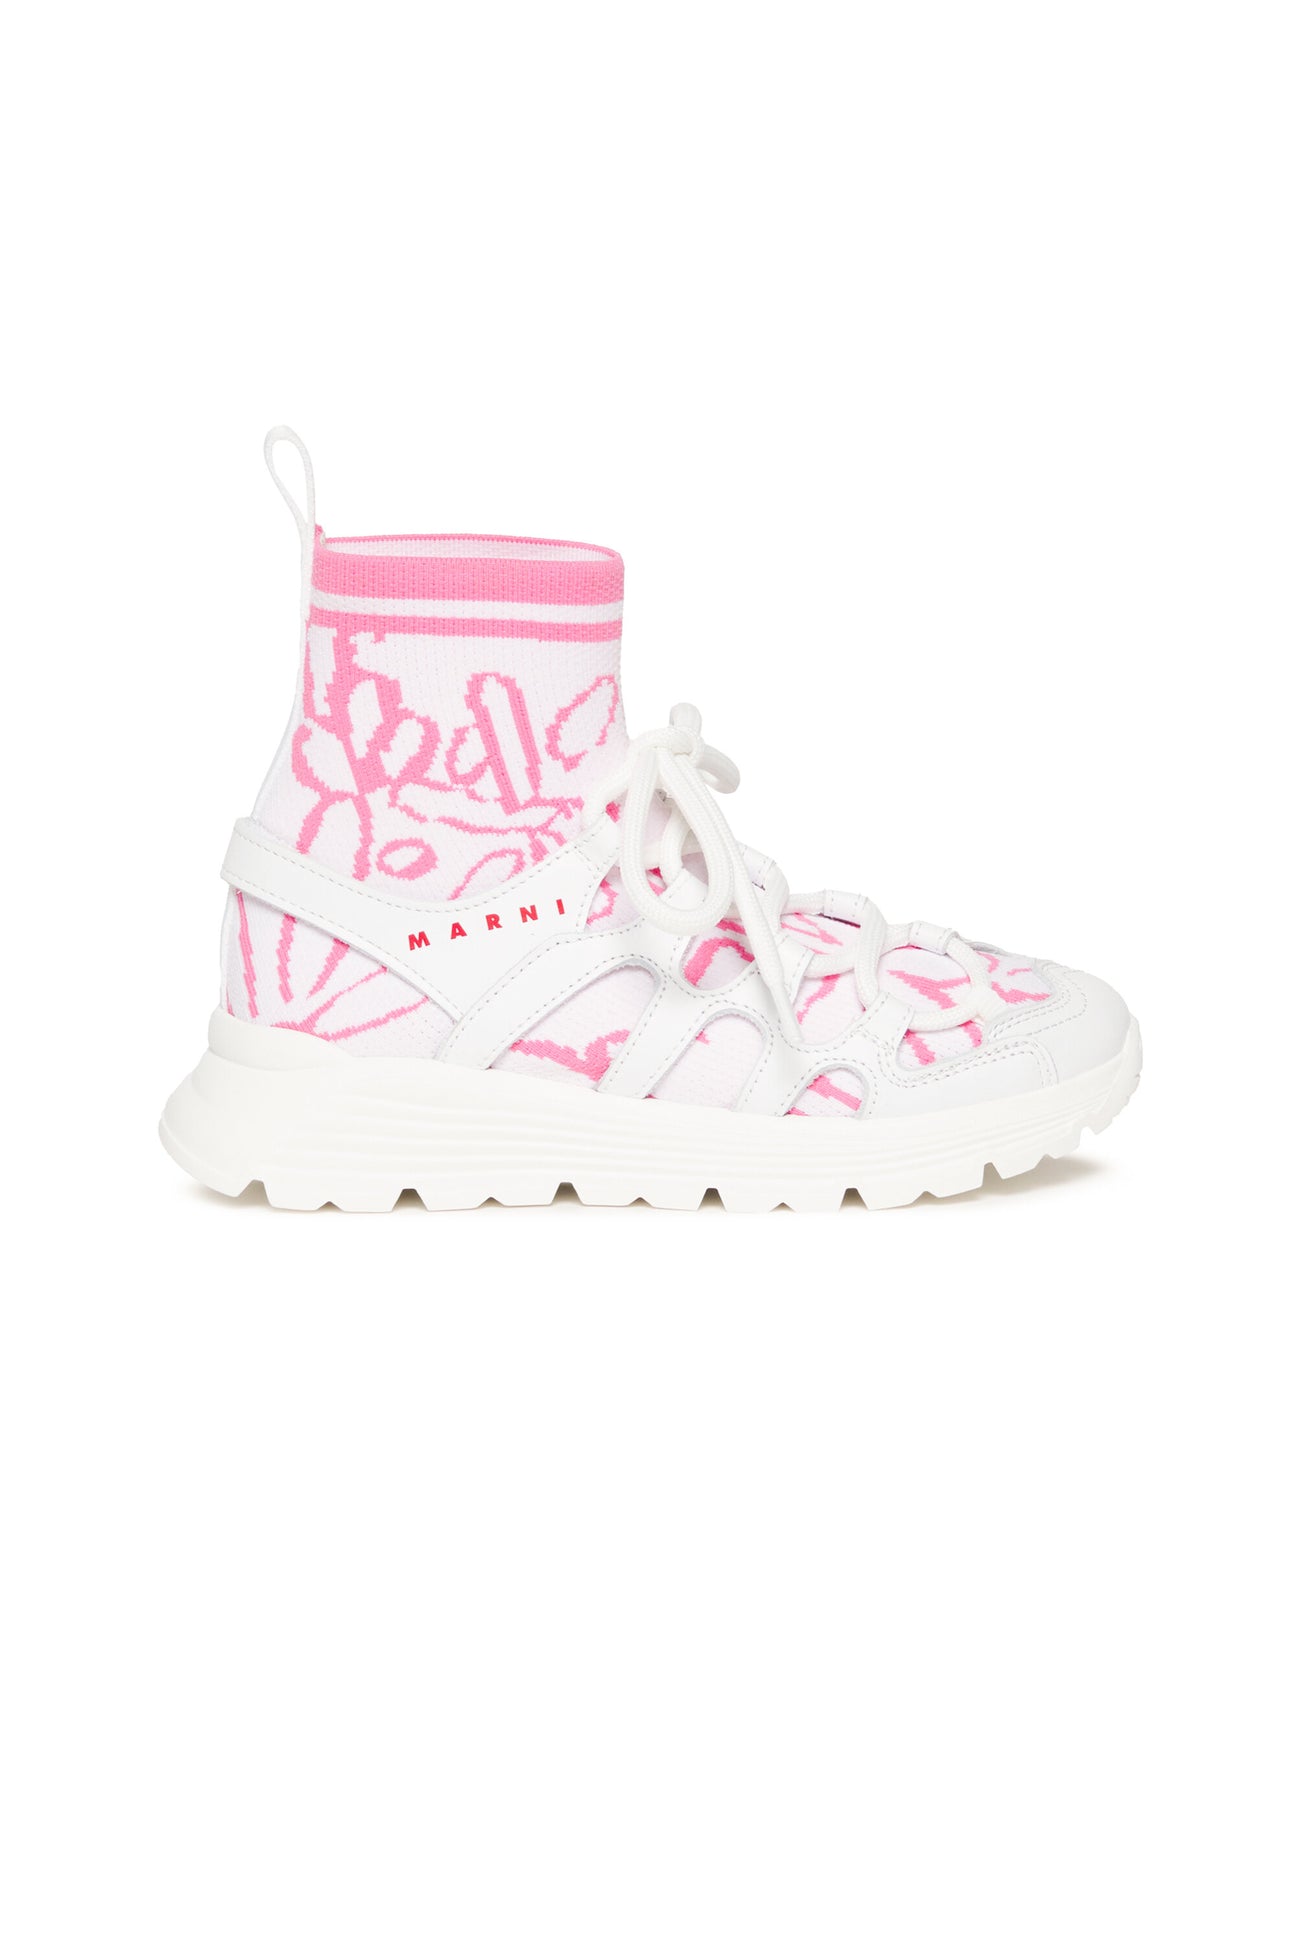 Girls' Designer Shoes: Sneakers, Boots, Sandals, Slippers | Brave Kid